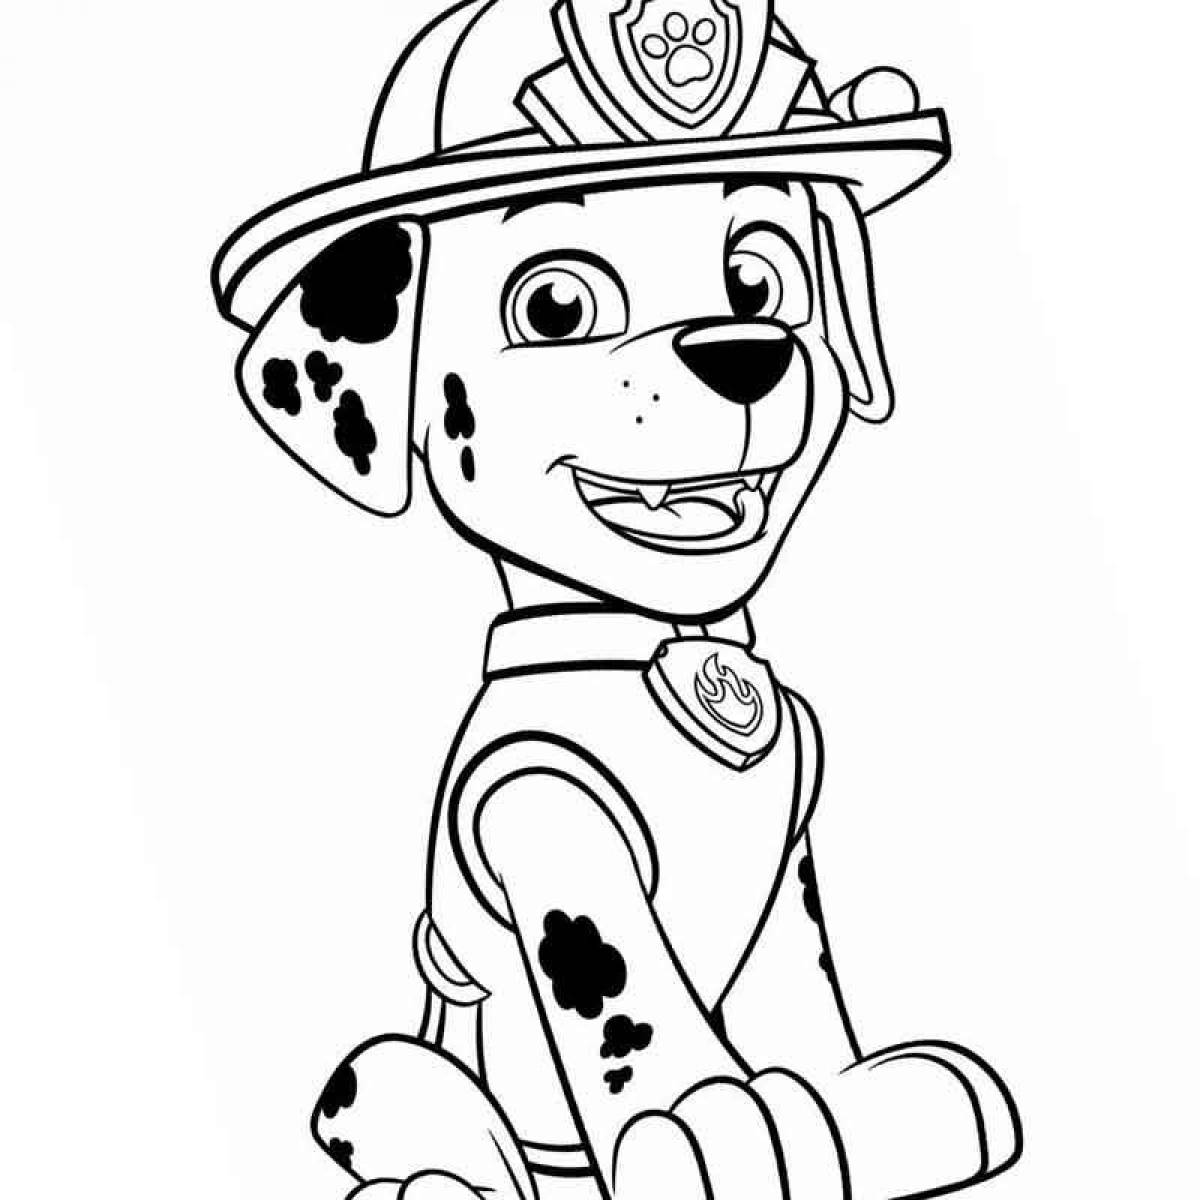 Marshal style coloring book